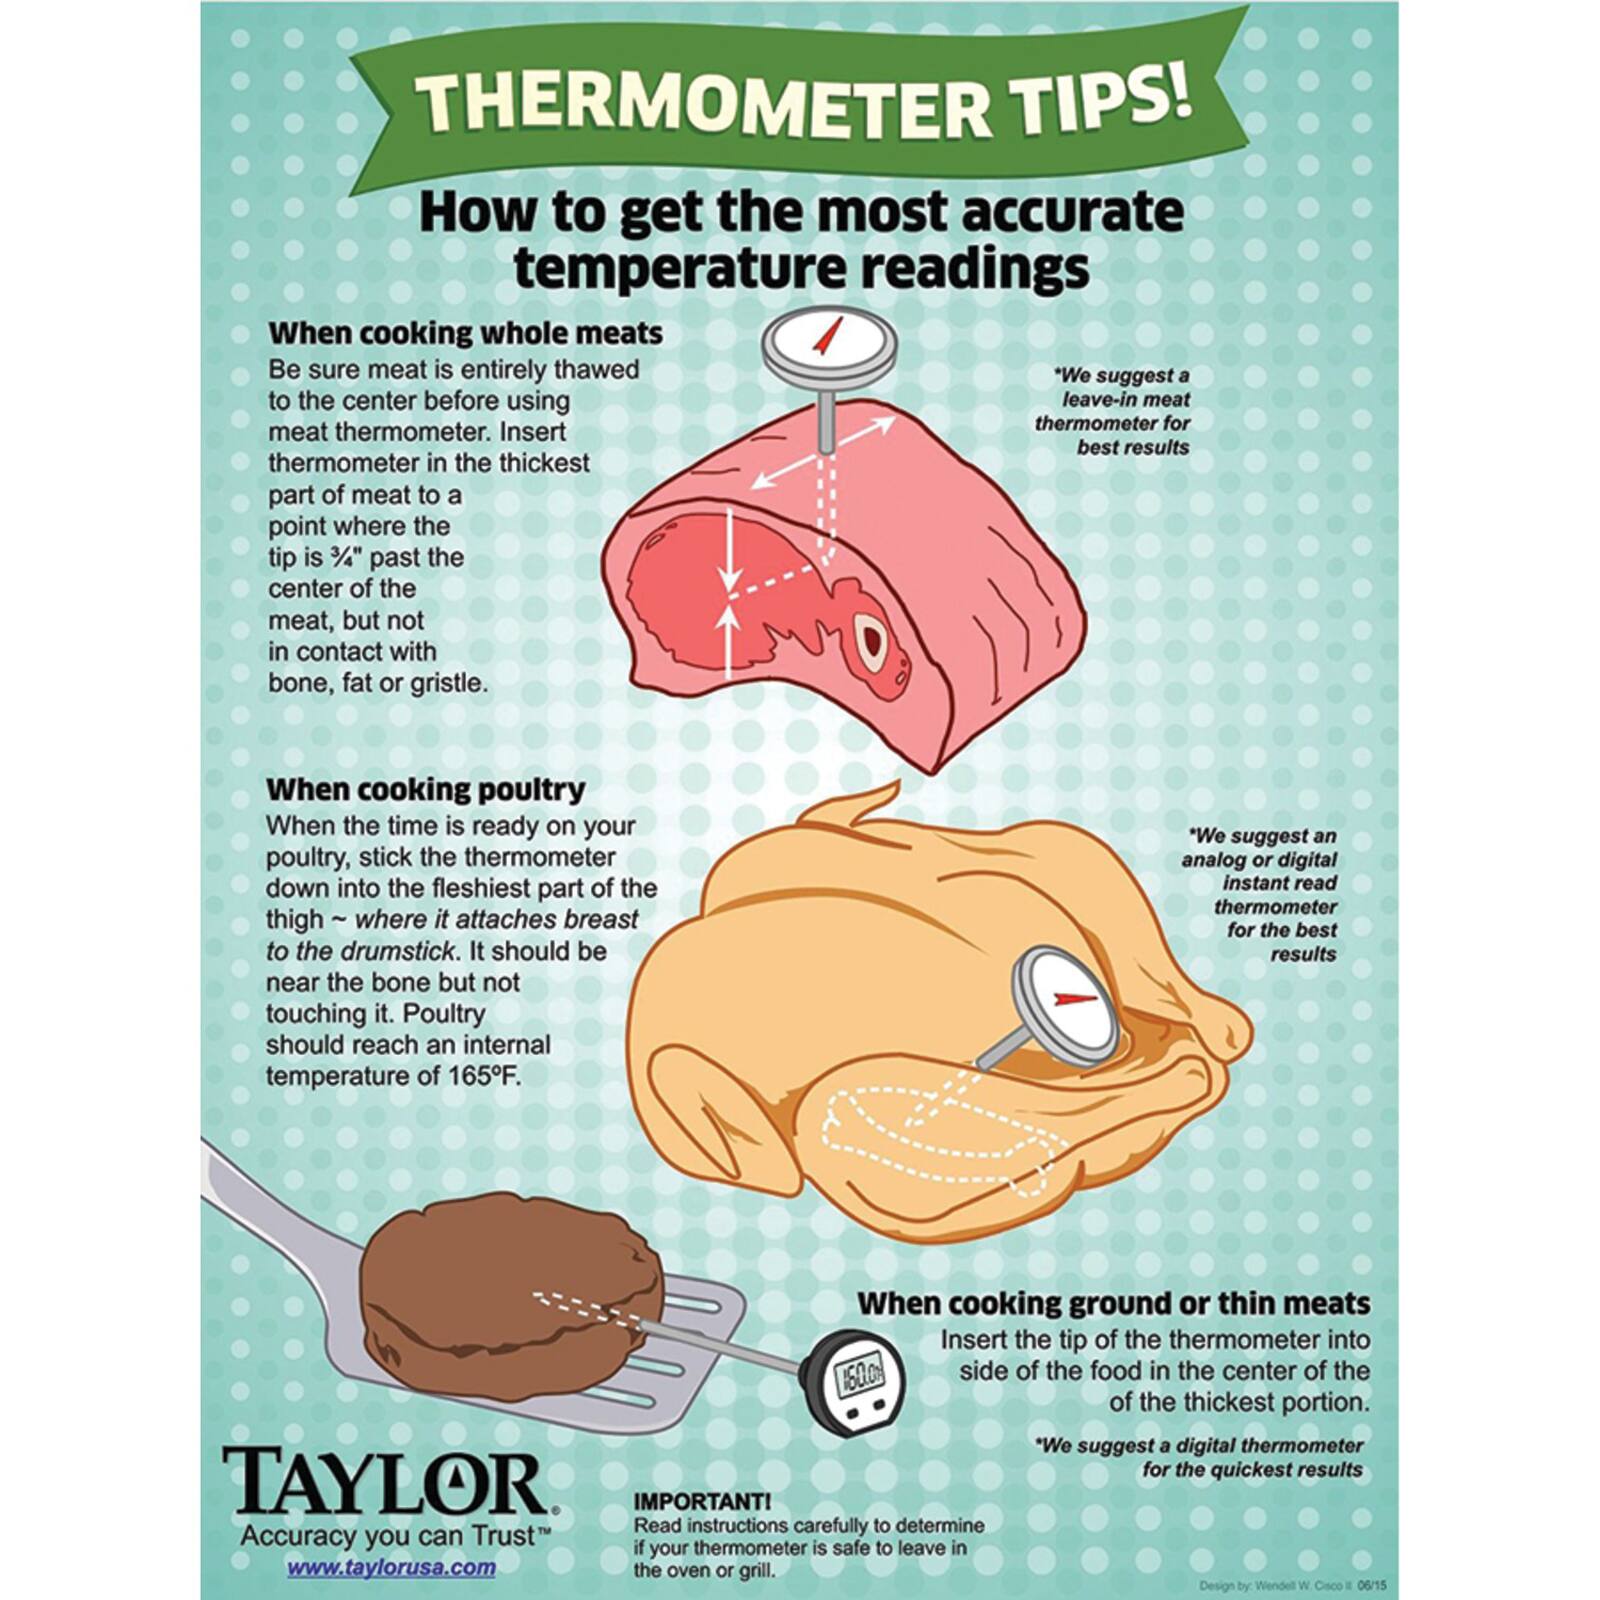  Taylor Waterproof Digital Instant Read Thermometer For